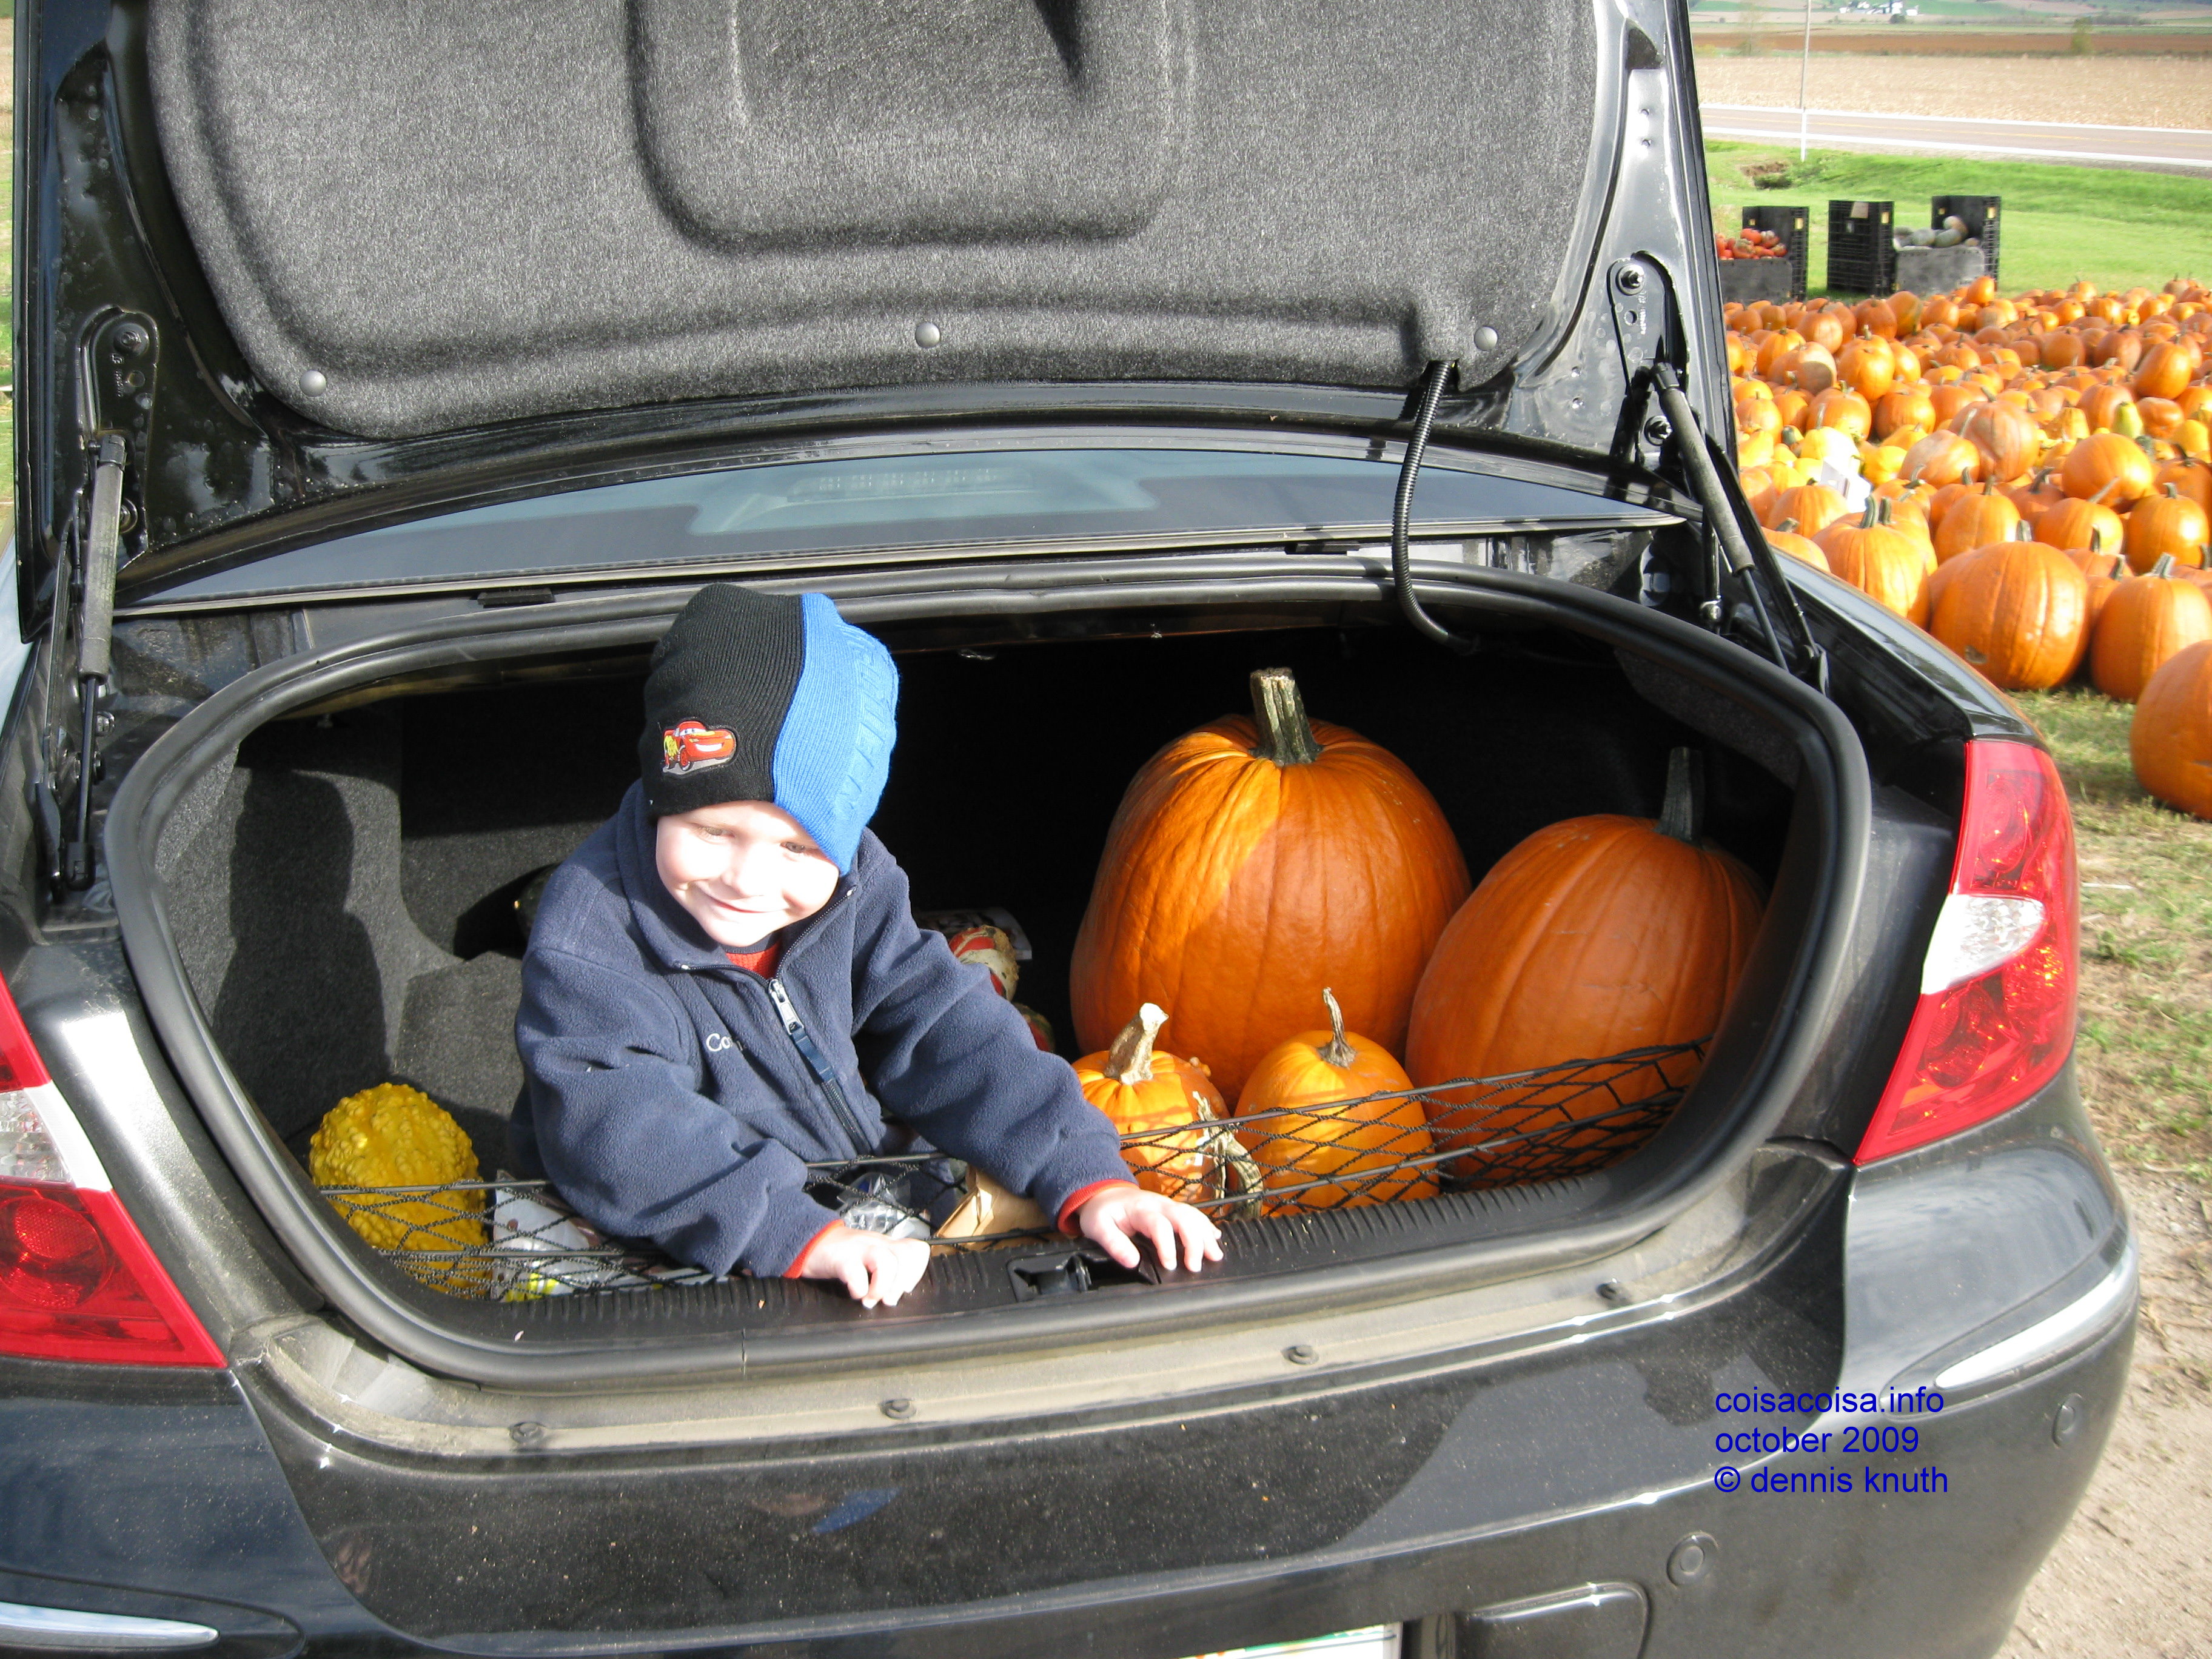 Jared helps put the gourds and pumpkins in the trunk